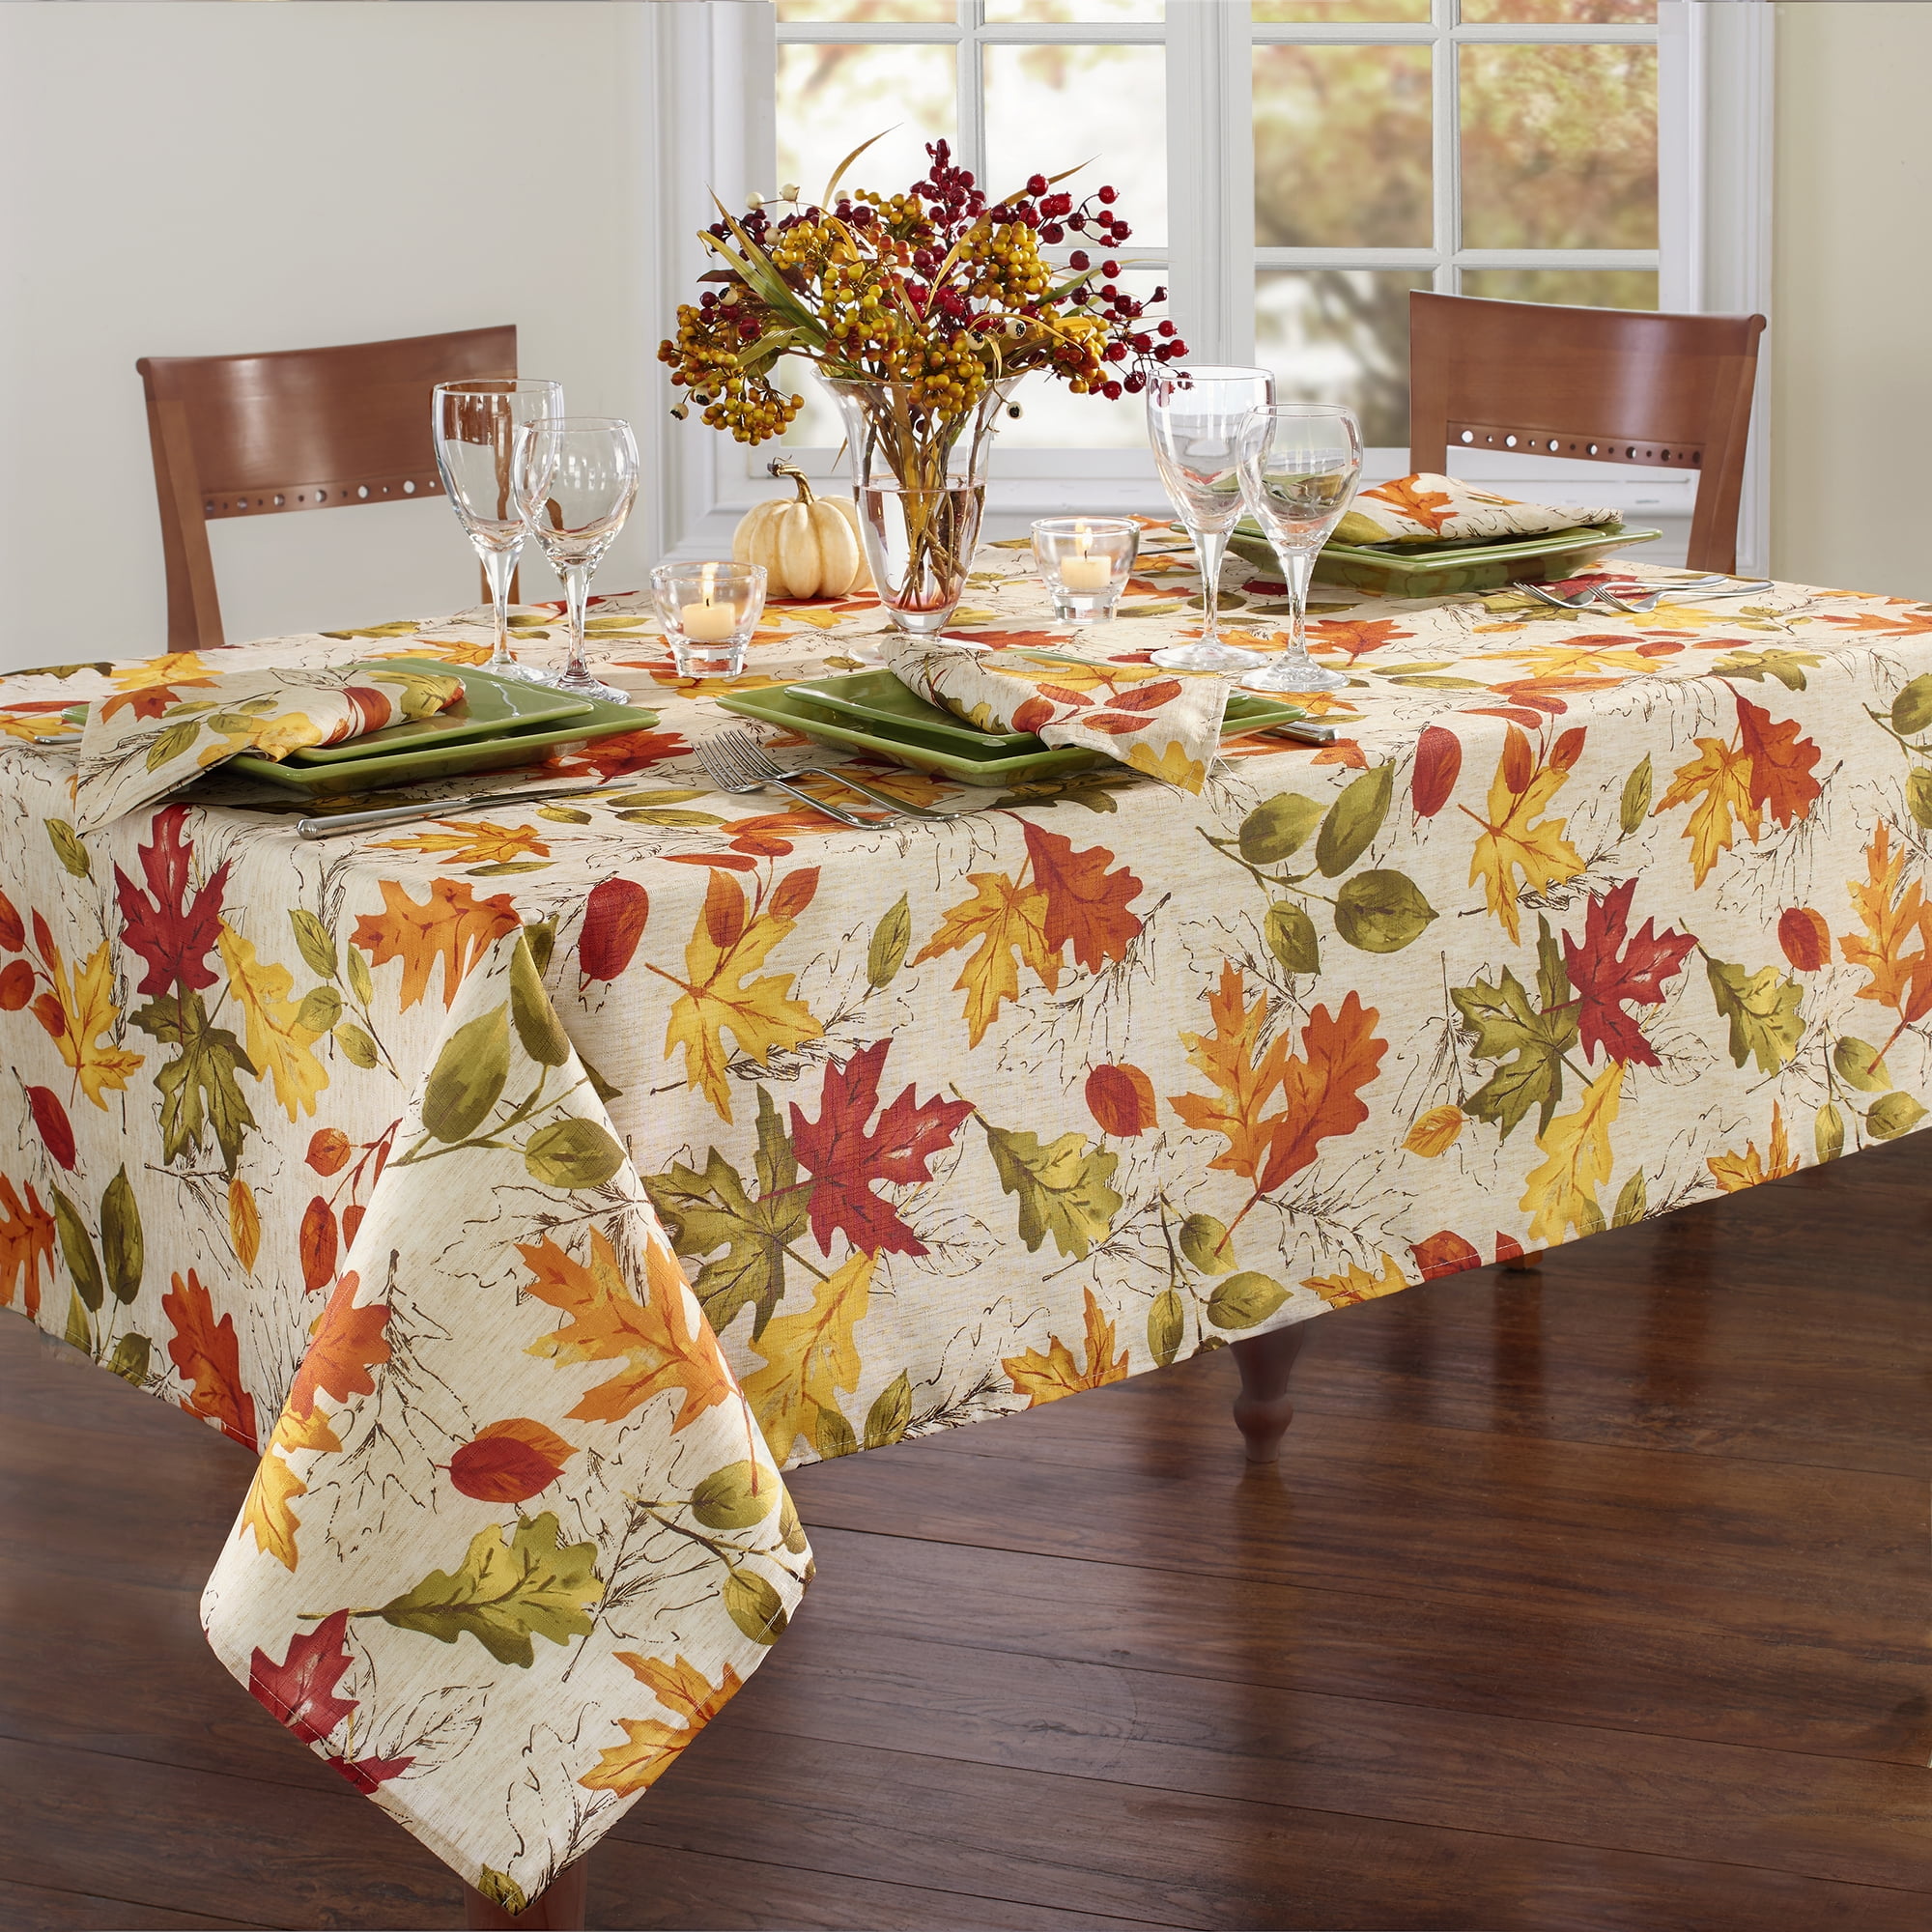 Autumn Foliage Leaves Digital Painting Round Tablecloth Waterproof Patterned Washable Table Cover for Holiday Home Party Picnic